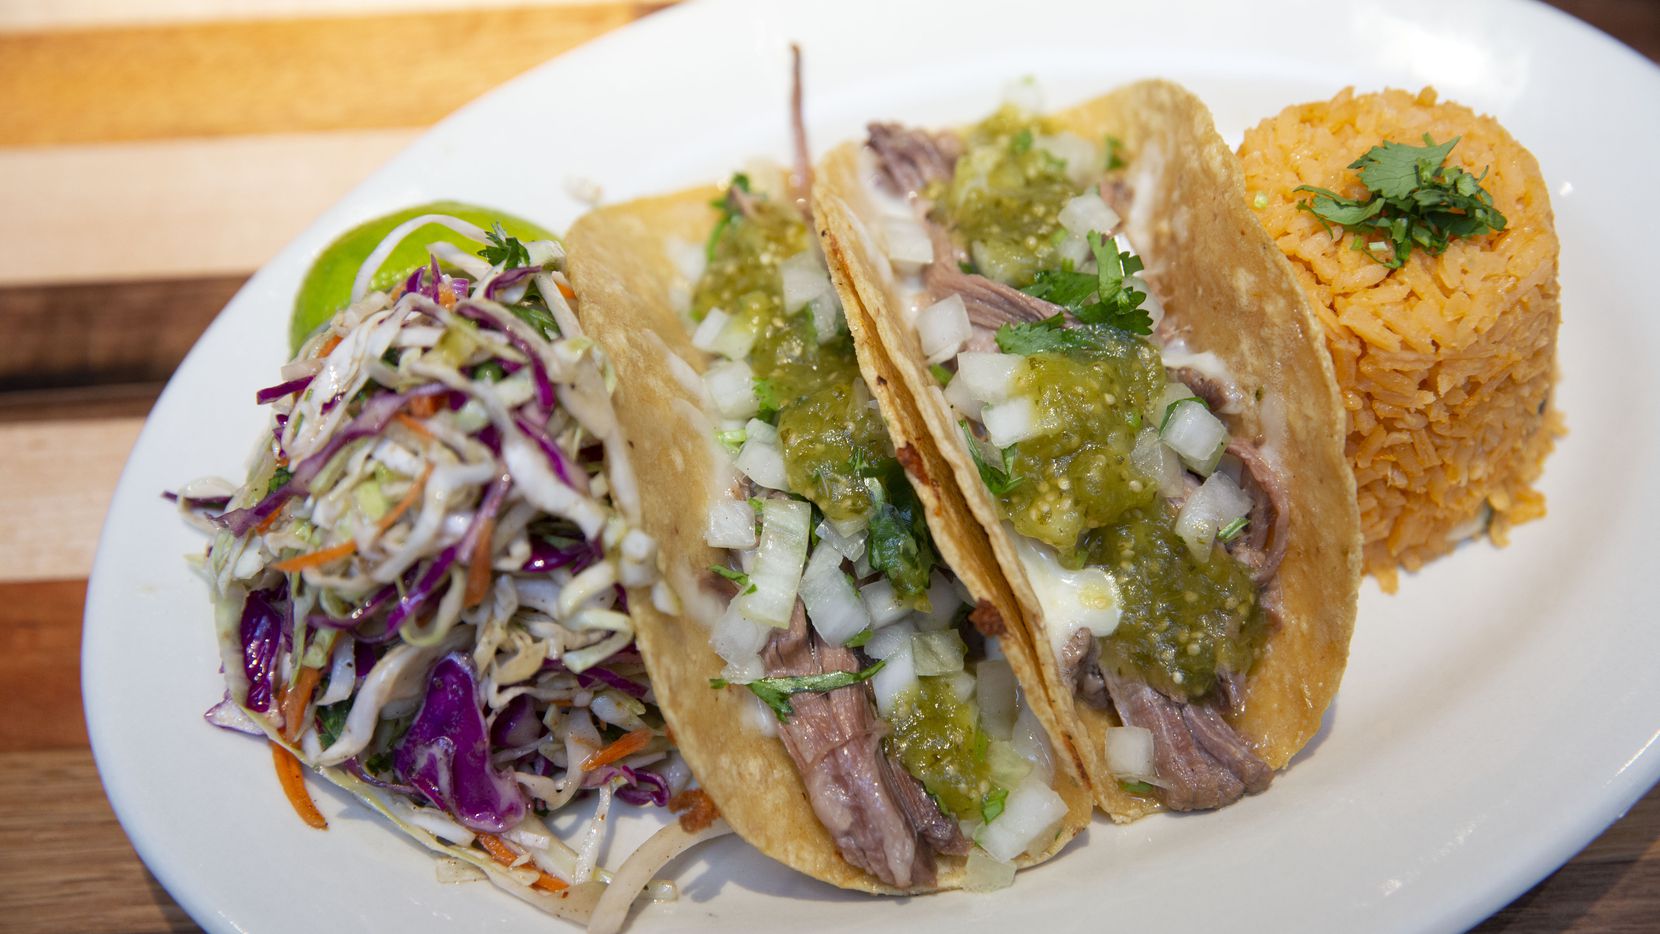 Brisket tacos are one of Mesero's most popular items. The new location in the Preston Hollow Village shopping center in Dallas opened Nov. 25, 2019.